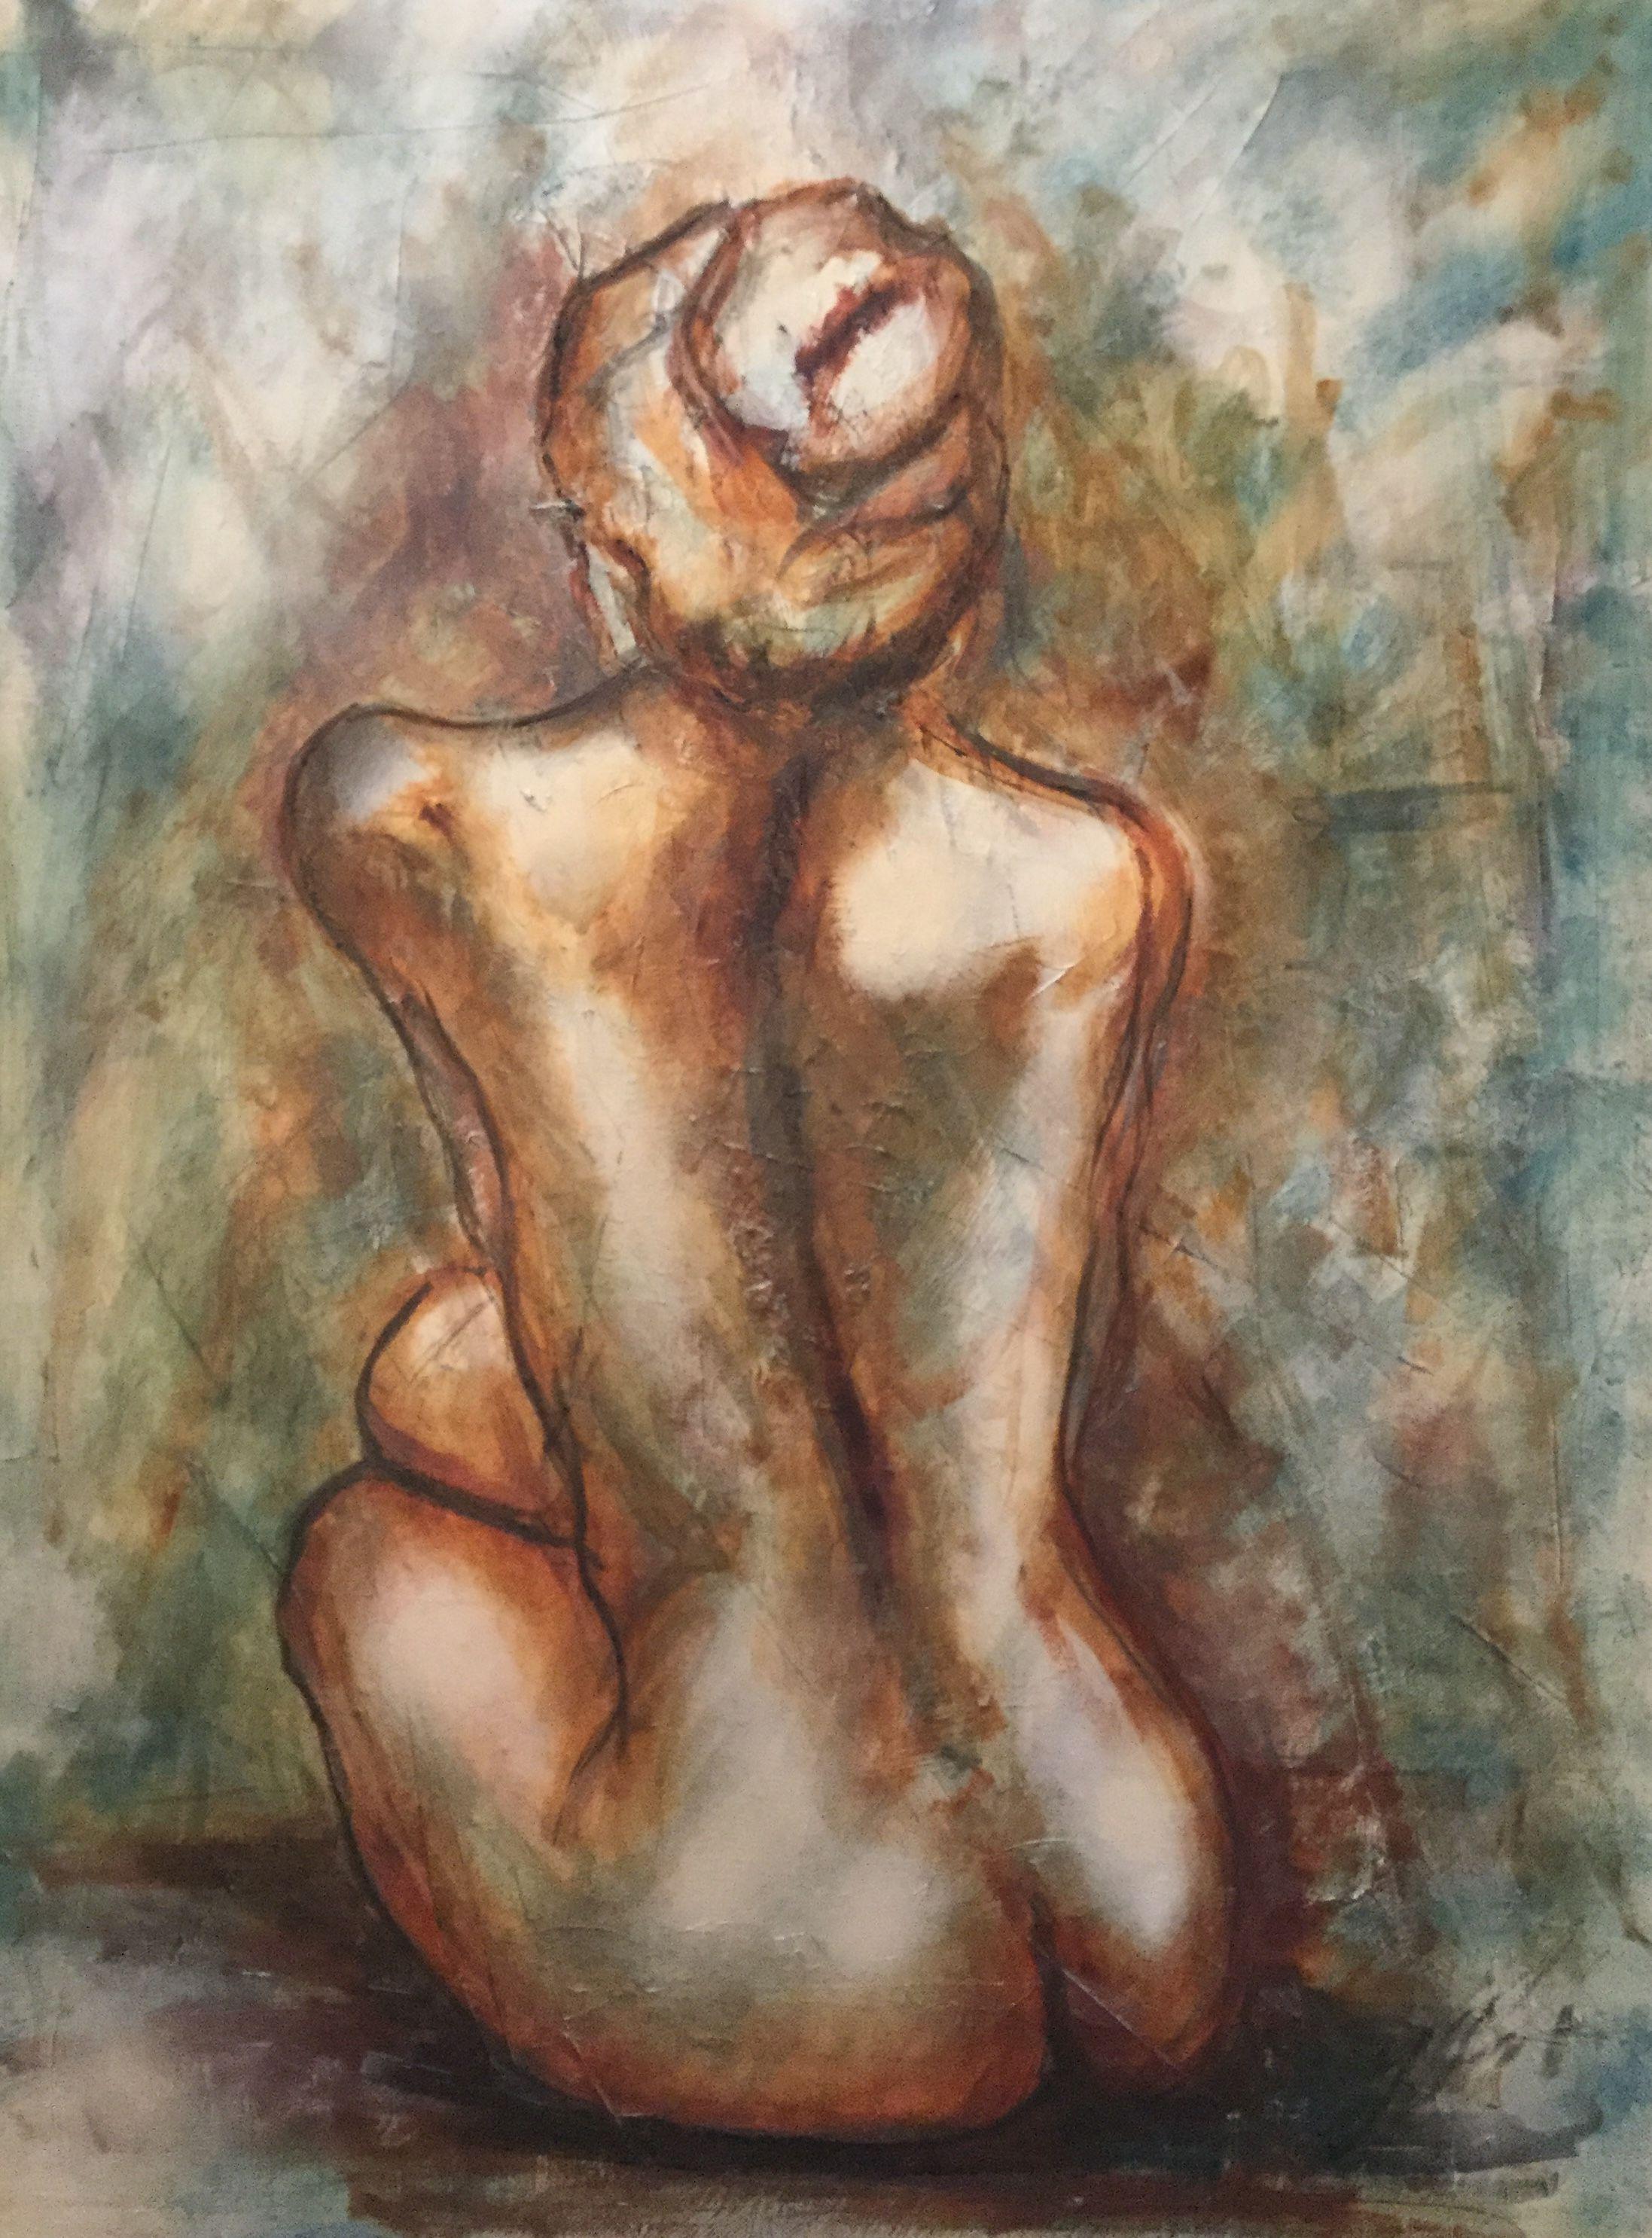 Original oil painting by James Shipton, on canvas. Earthy tones produce the form, that capture the link between the human female form and the world around her. Textured and reflective to capture changes in light.  My works are heavily influenced by